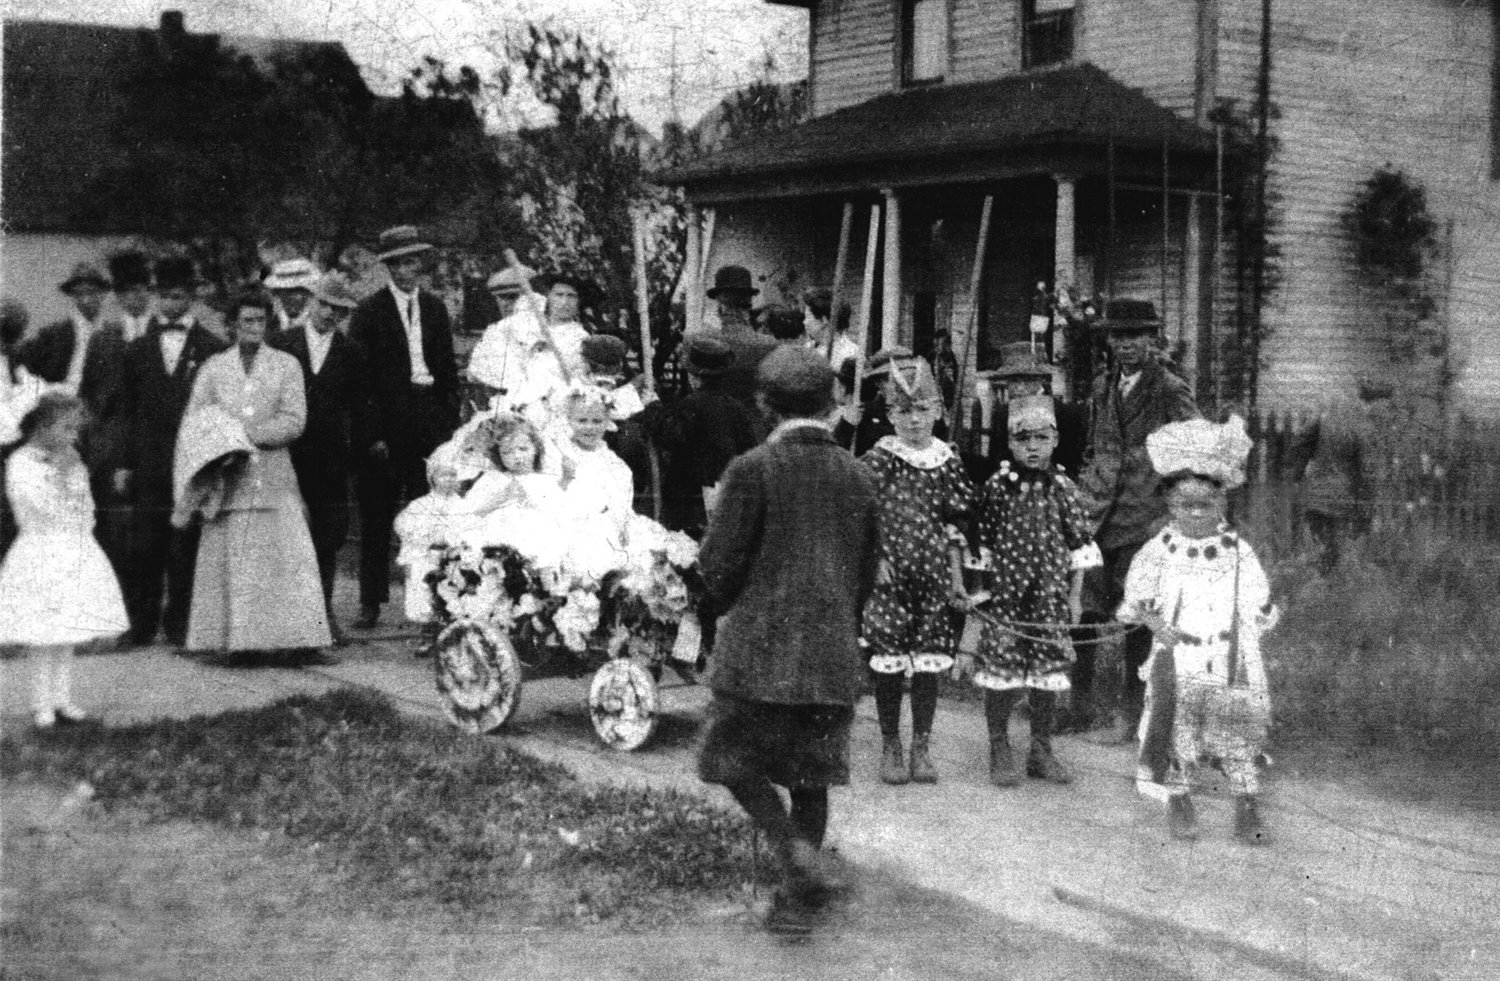 This Fourth of July parade took place in about 1911 in Pe Ell. The Allen children took first place with their float on that day. In the lead is Bob Allen, who is thought to be about 4 years old at the time. Behind him are his brothers John and Rex. All three boys are hitched to the wagon pulling Catherine (on the left) and an unknown neighbor child (on the right). The children’s parents were Harvey and Mabel Allen of Pe Ell. Harvey was a barber and fiddle player and Bob was the father of this photo’s contributor.